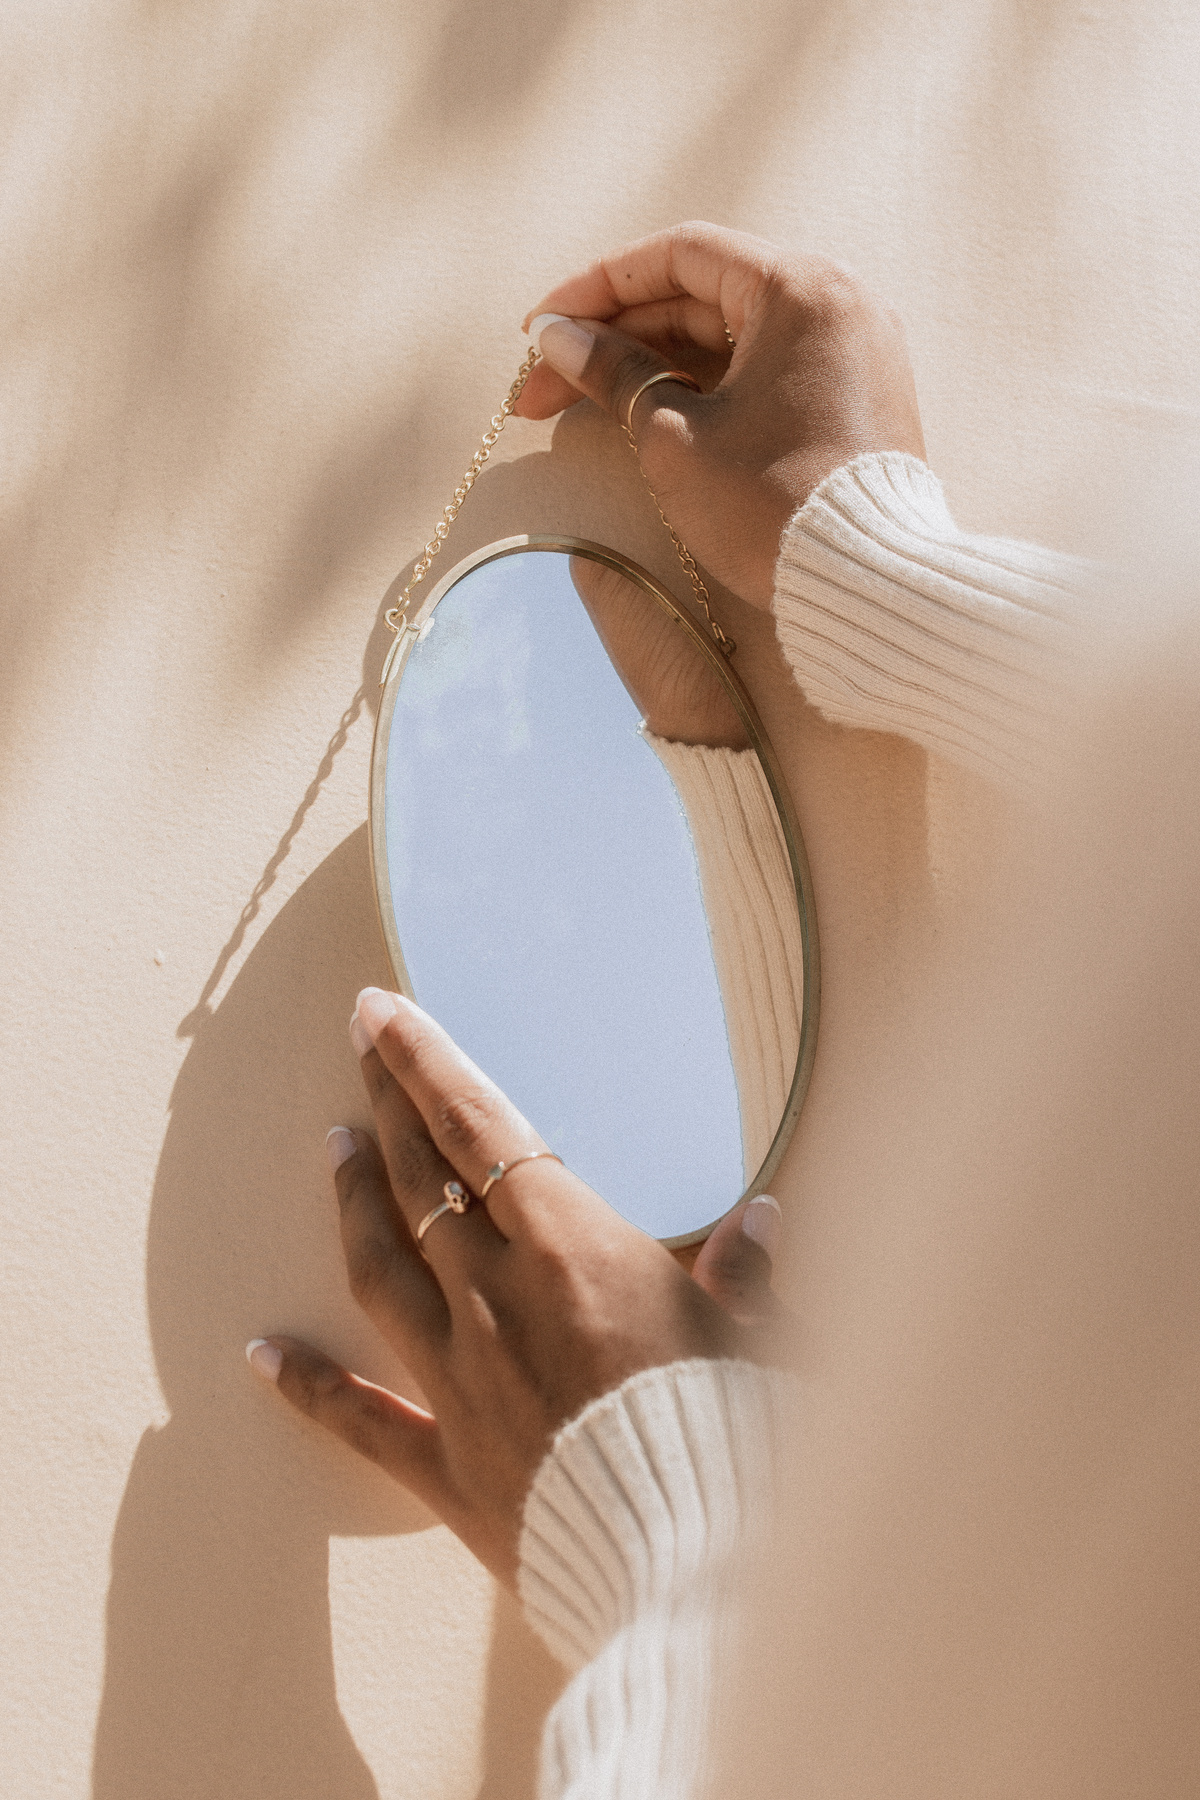 Female Hands Holding a Mirror